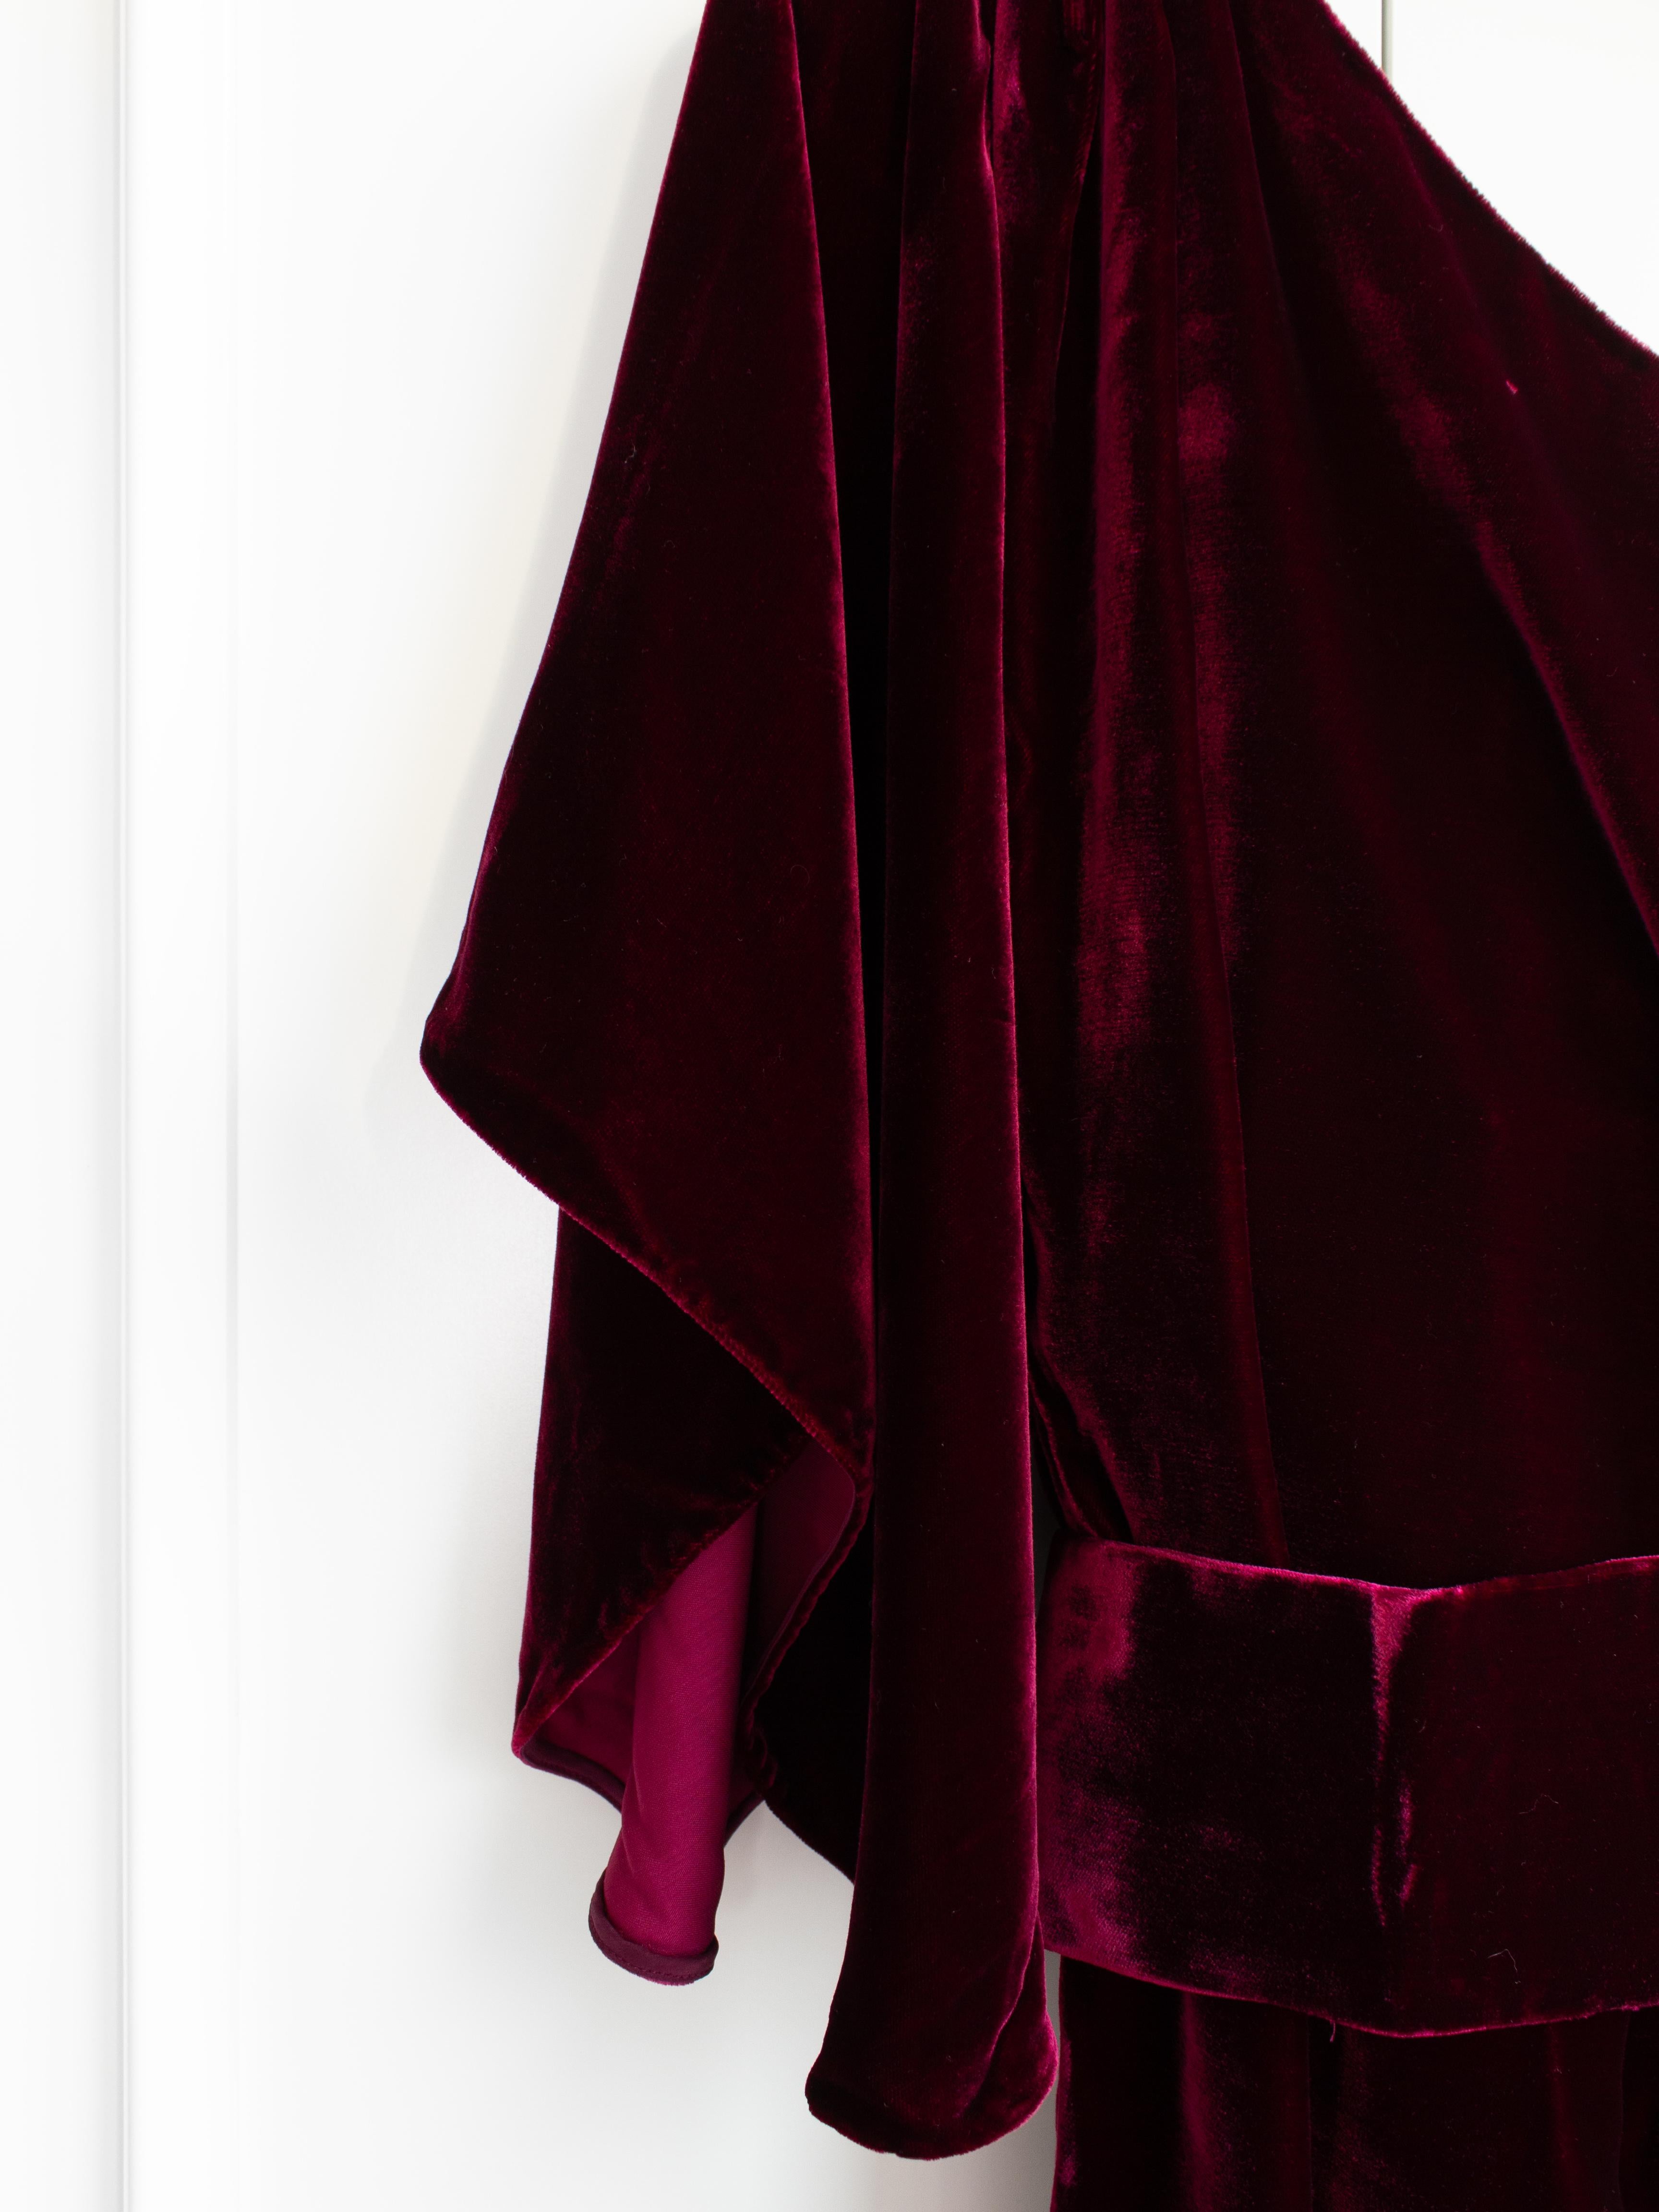 $6500 Ralph&Russo Red Carpet Lady Gaga Wine Red Burgundy Belted Velvet Ava Gown 7